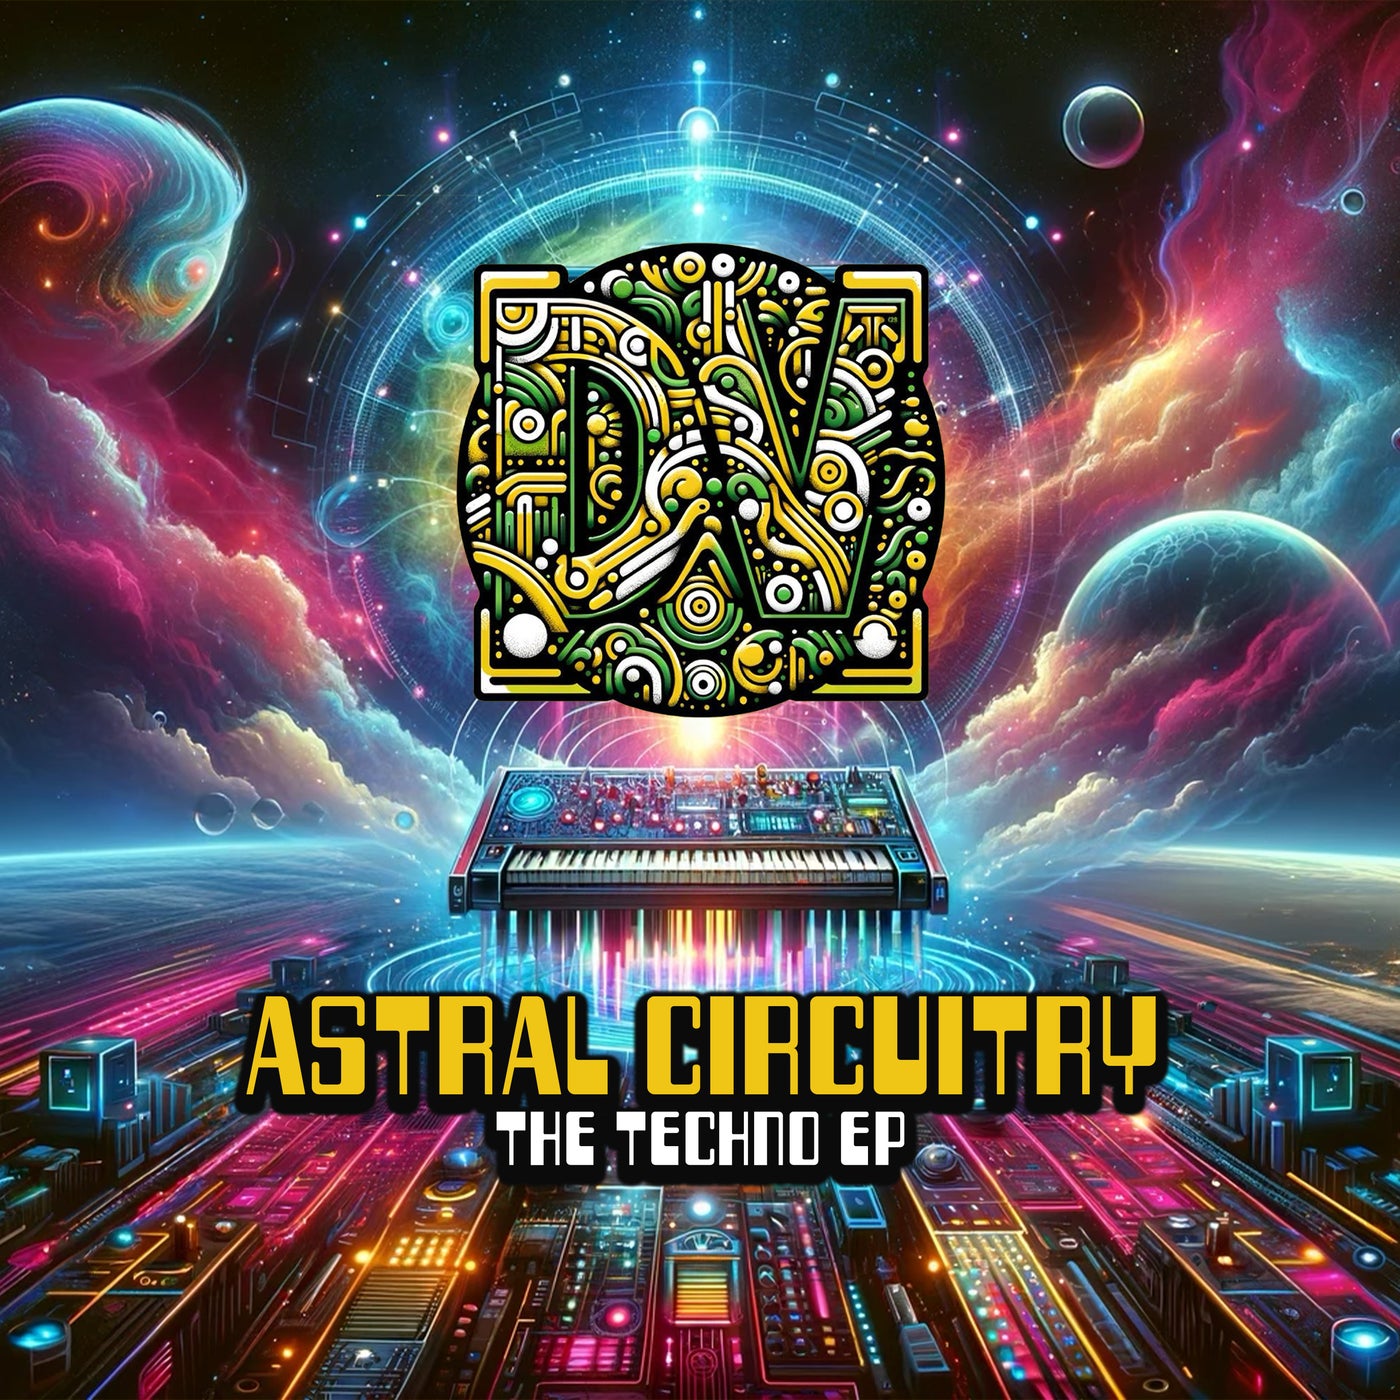 Astral Circuitry: The Techno EP